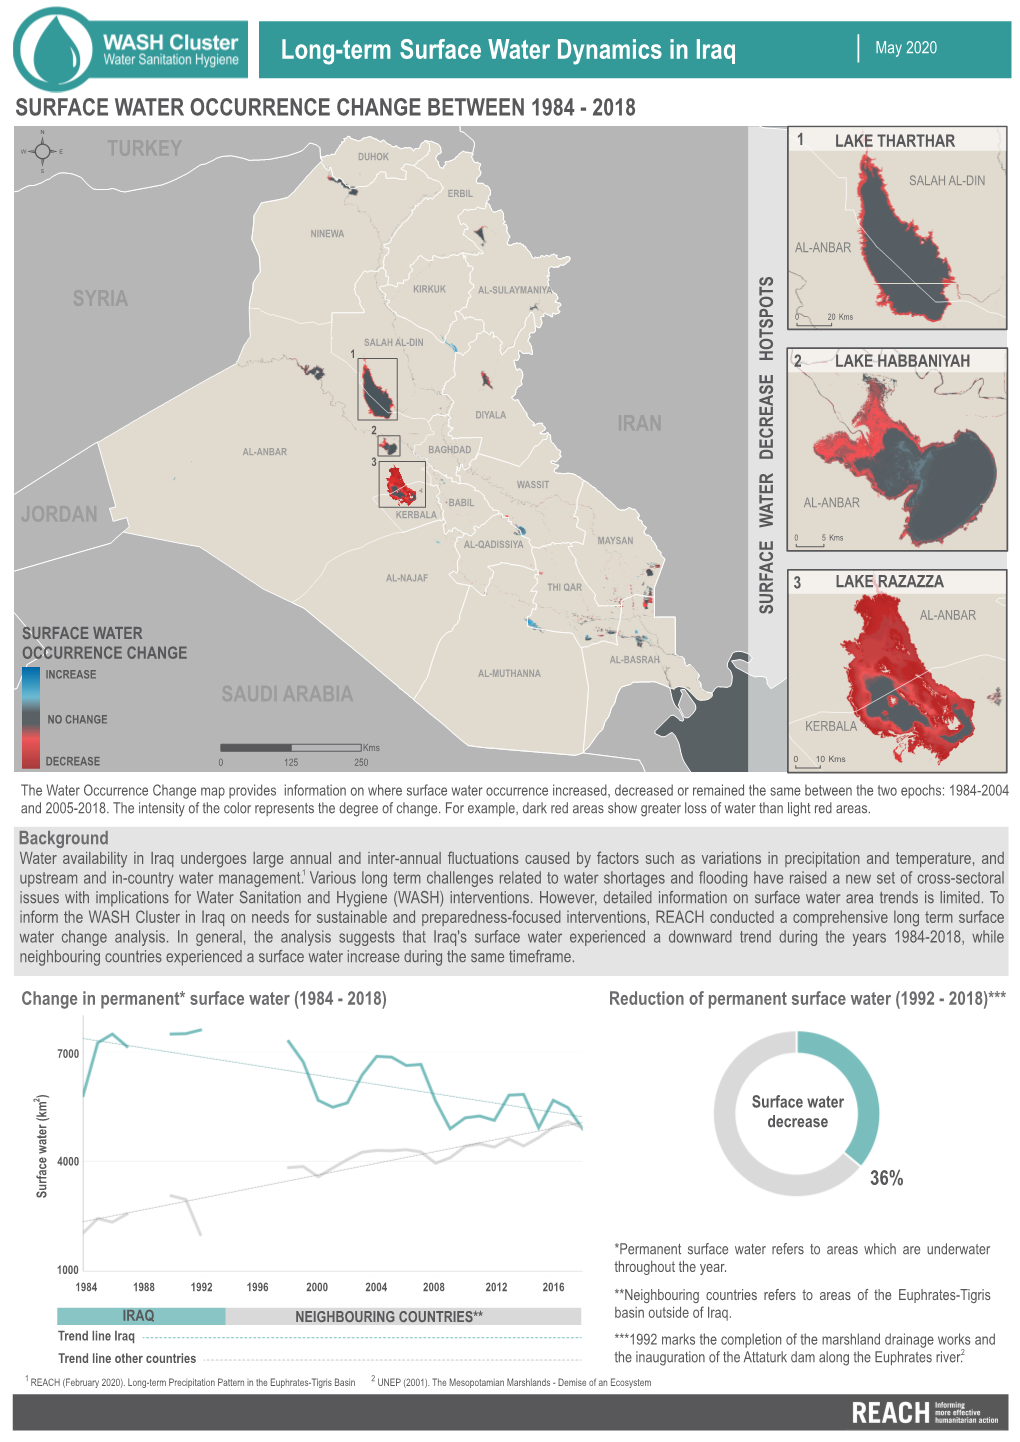 Long-Term Surface Water Dynamics in Iraq, May 2020.Pdf